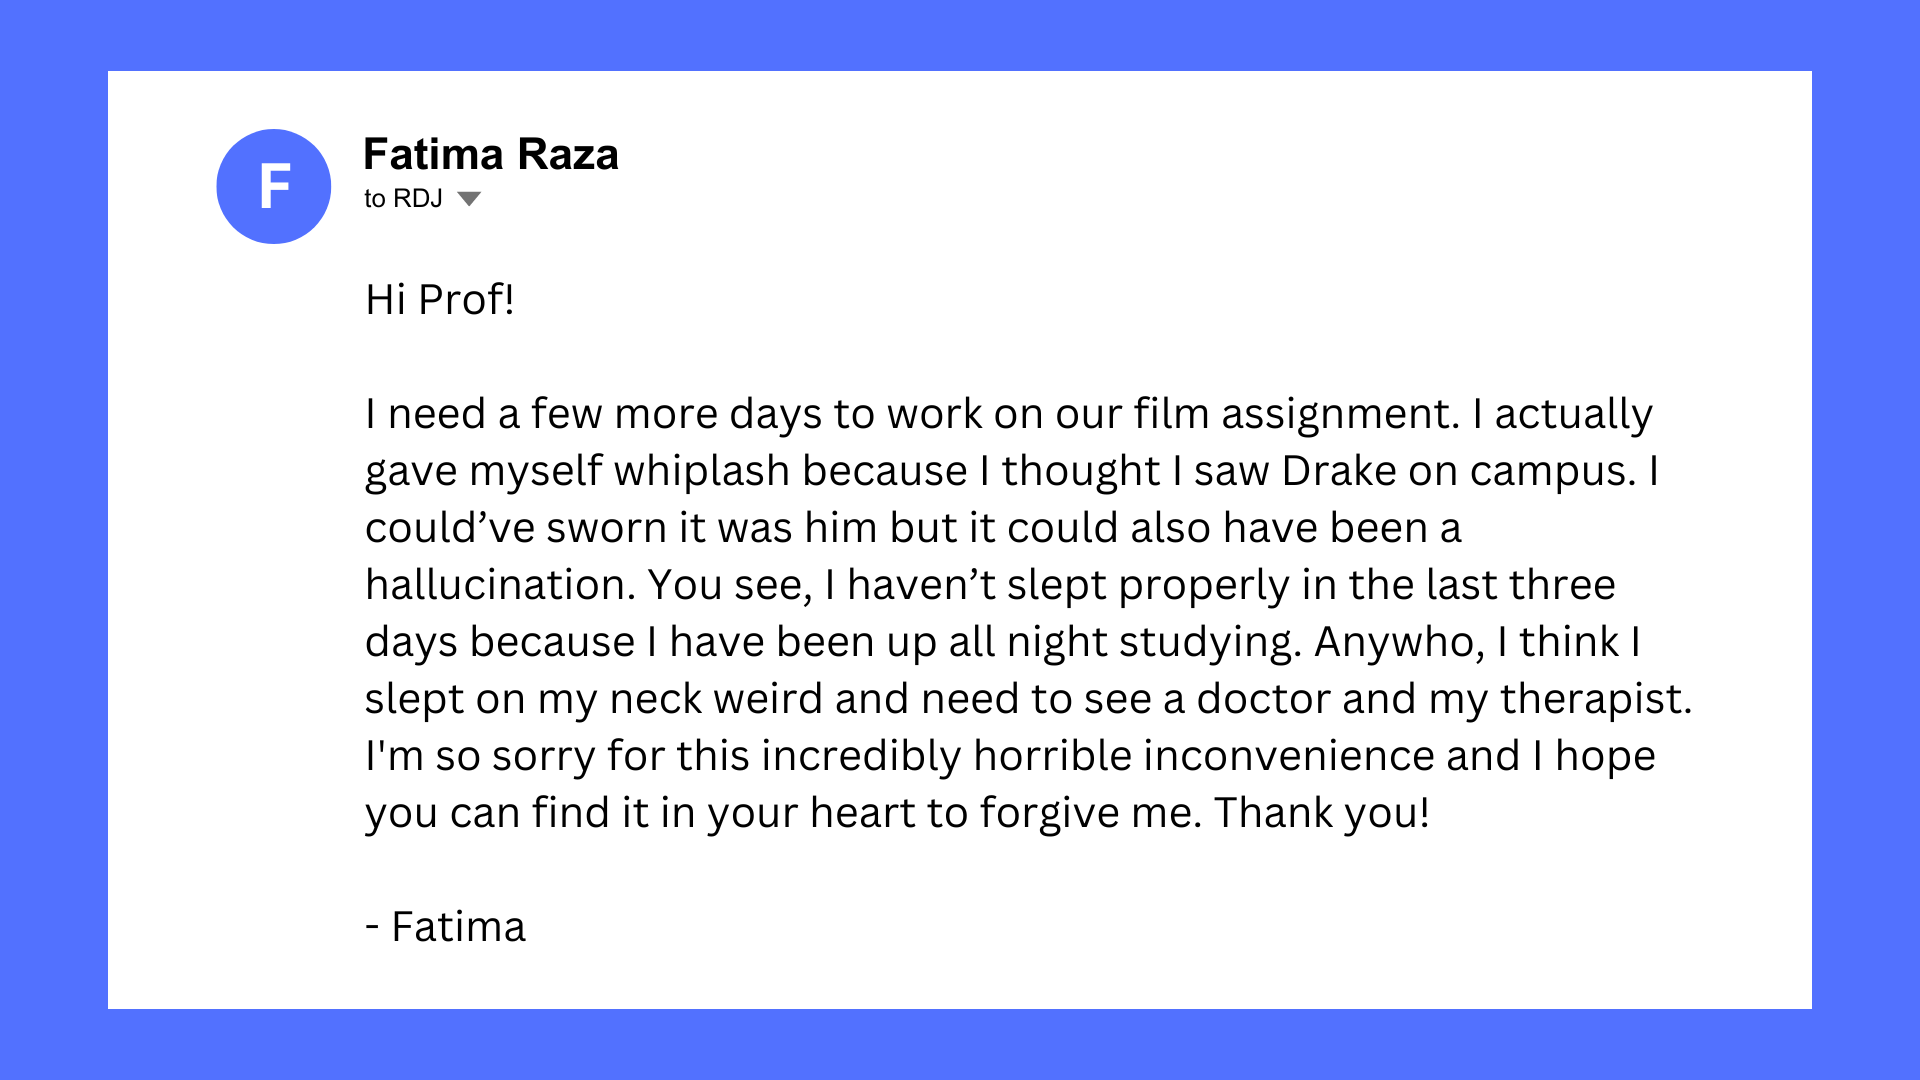 Fake email screenshot from Fatima Raza to RDJ. Email reads: Hi Prof! I need a few more days to work on our film assignment. I actually gave myself whiplash because I thought I saw Drake on campus. I could’ve sworn it was him but it could also have been a hallucination. You see, I haven’t slept properly in the last three days because I have been up all night studying. Anywho, I think I slept on my neck weird and need to see a doctor and my therapist. I'm so sorry for this incredibly horrible inconvenience and I hope you can find it in your heart to forgive me. Thank you!